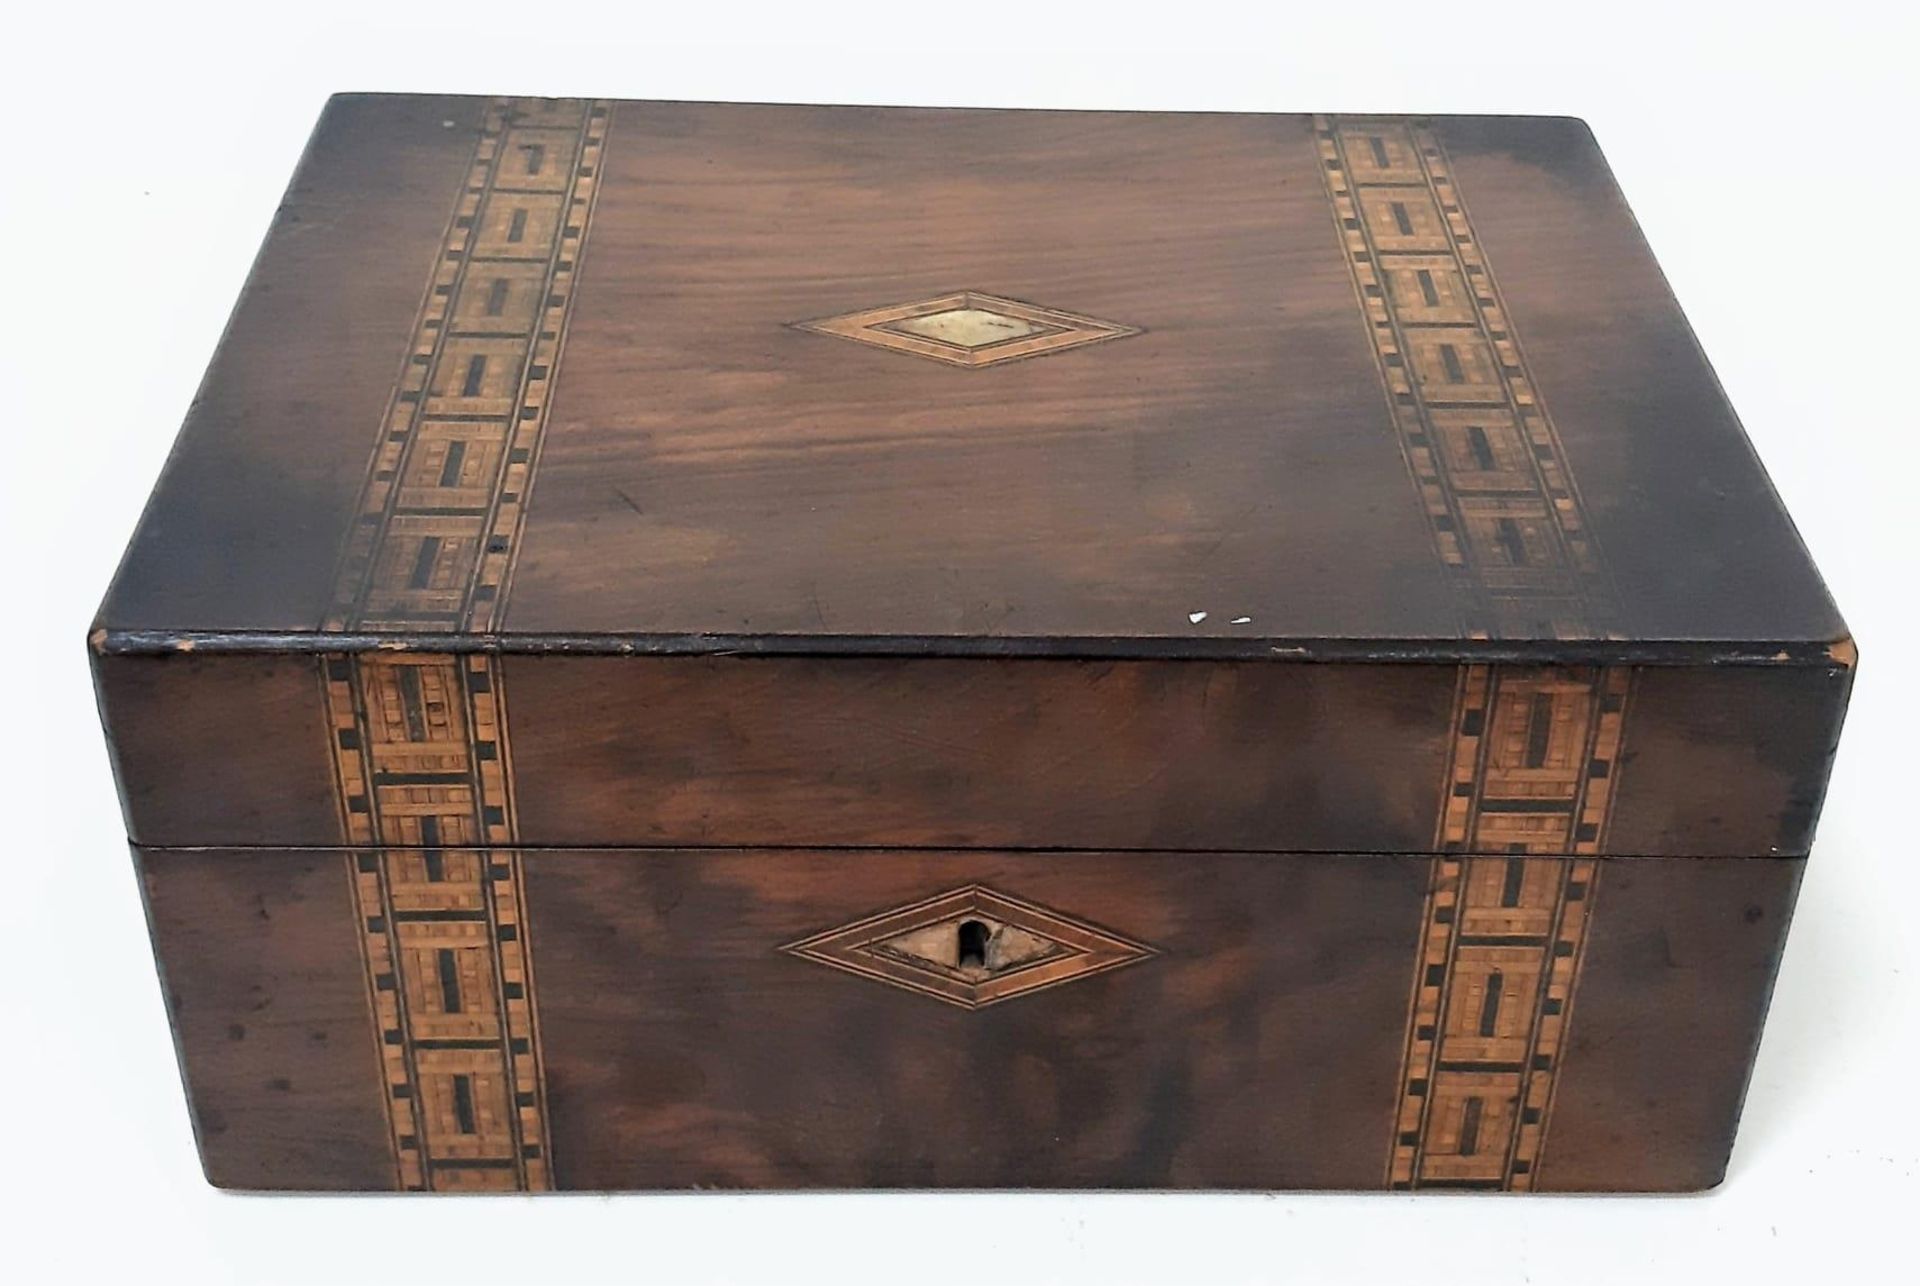 A BEAUTIFULLY INLAID WOODEN BOX 30 X 21 X 13cms WITH MOTHER OF PEARL INLAY TO TOPSIDE. INTERIOR NEED - Image 4 of 9